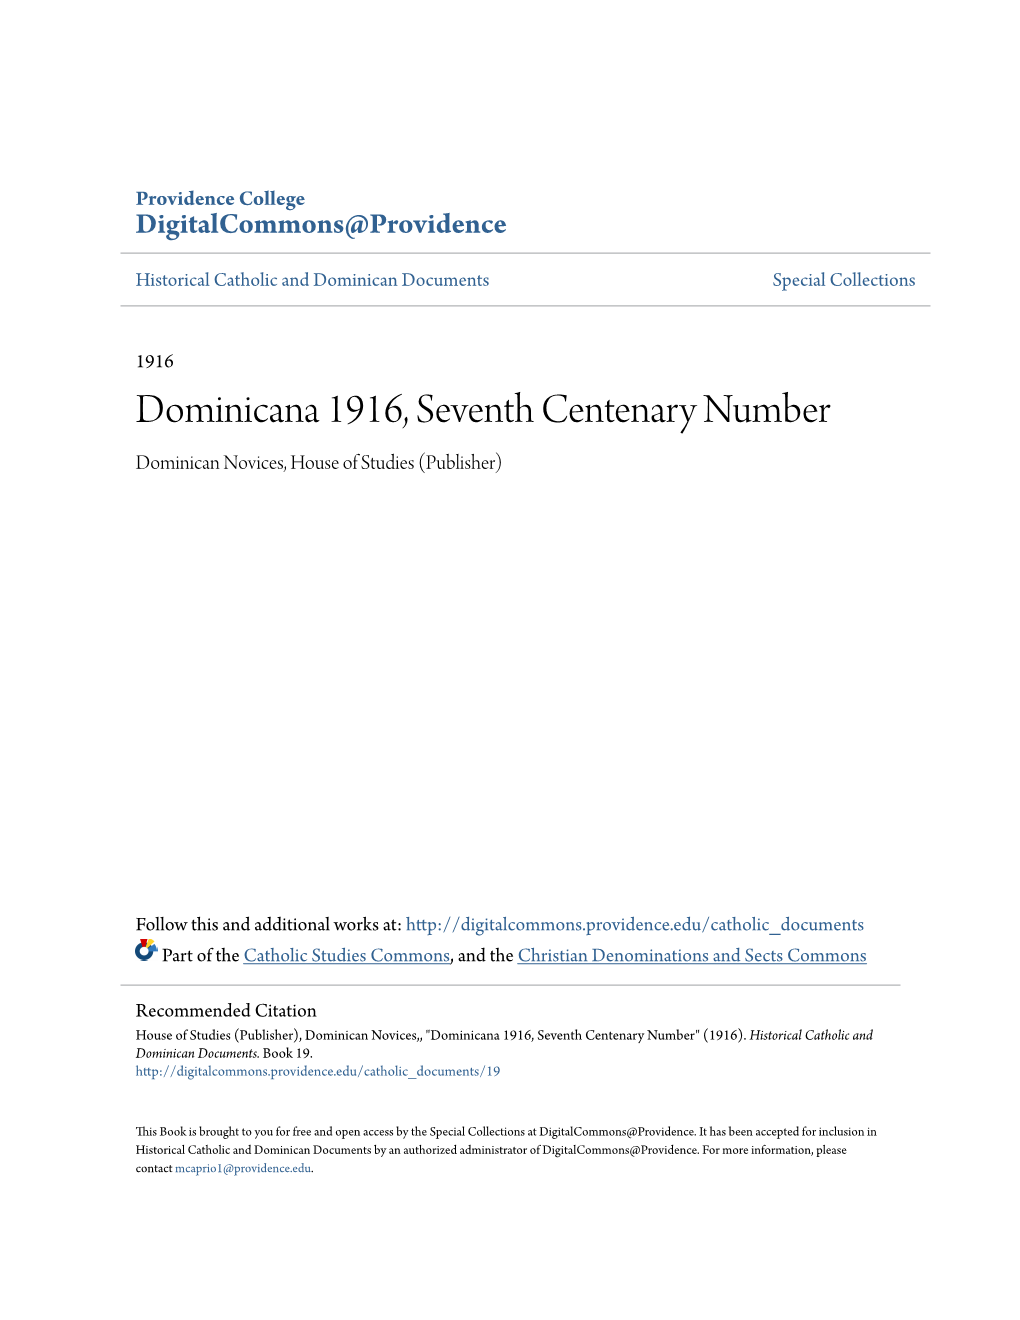 Dominicana 1916, Seventh Centenary Number Dominican Novices, House of Studies (Publisher)